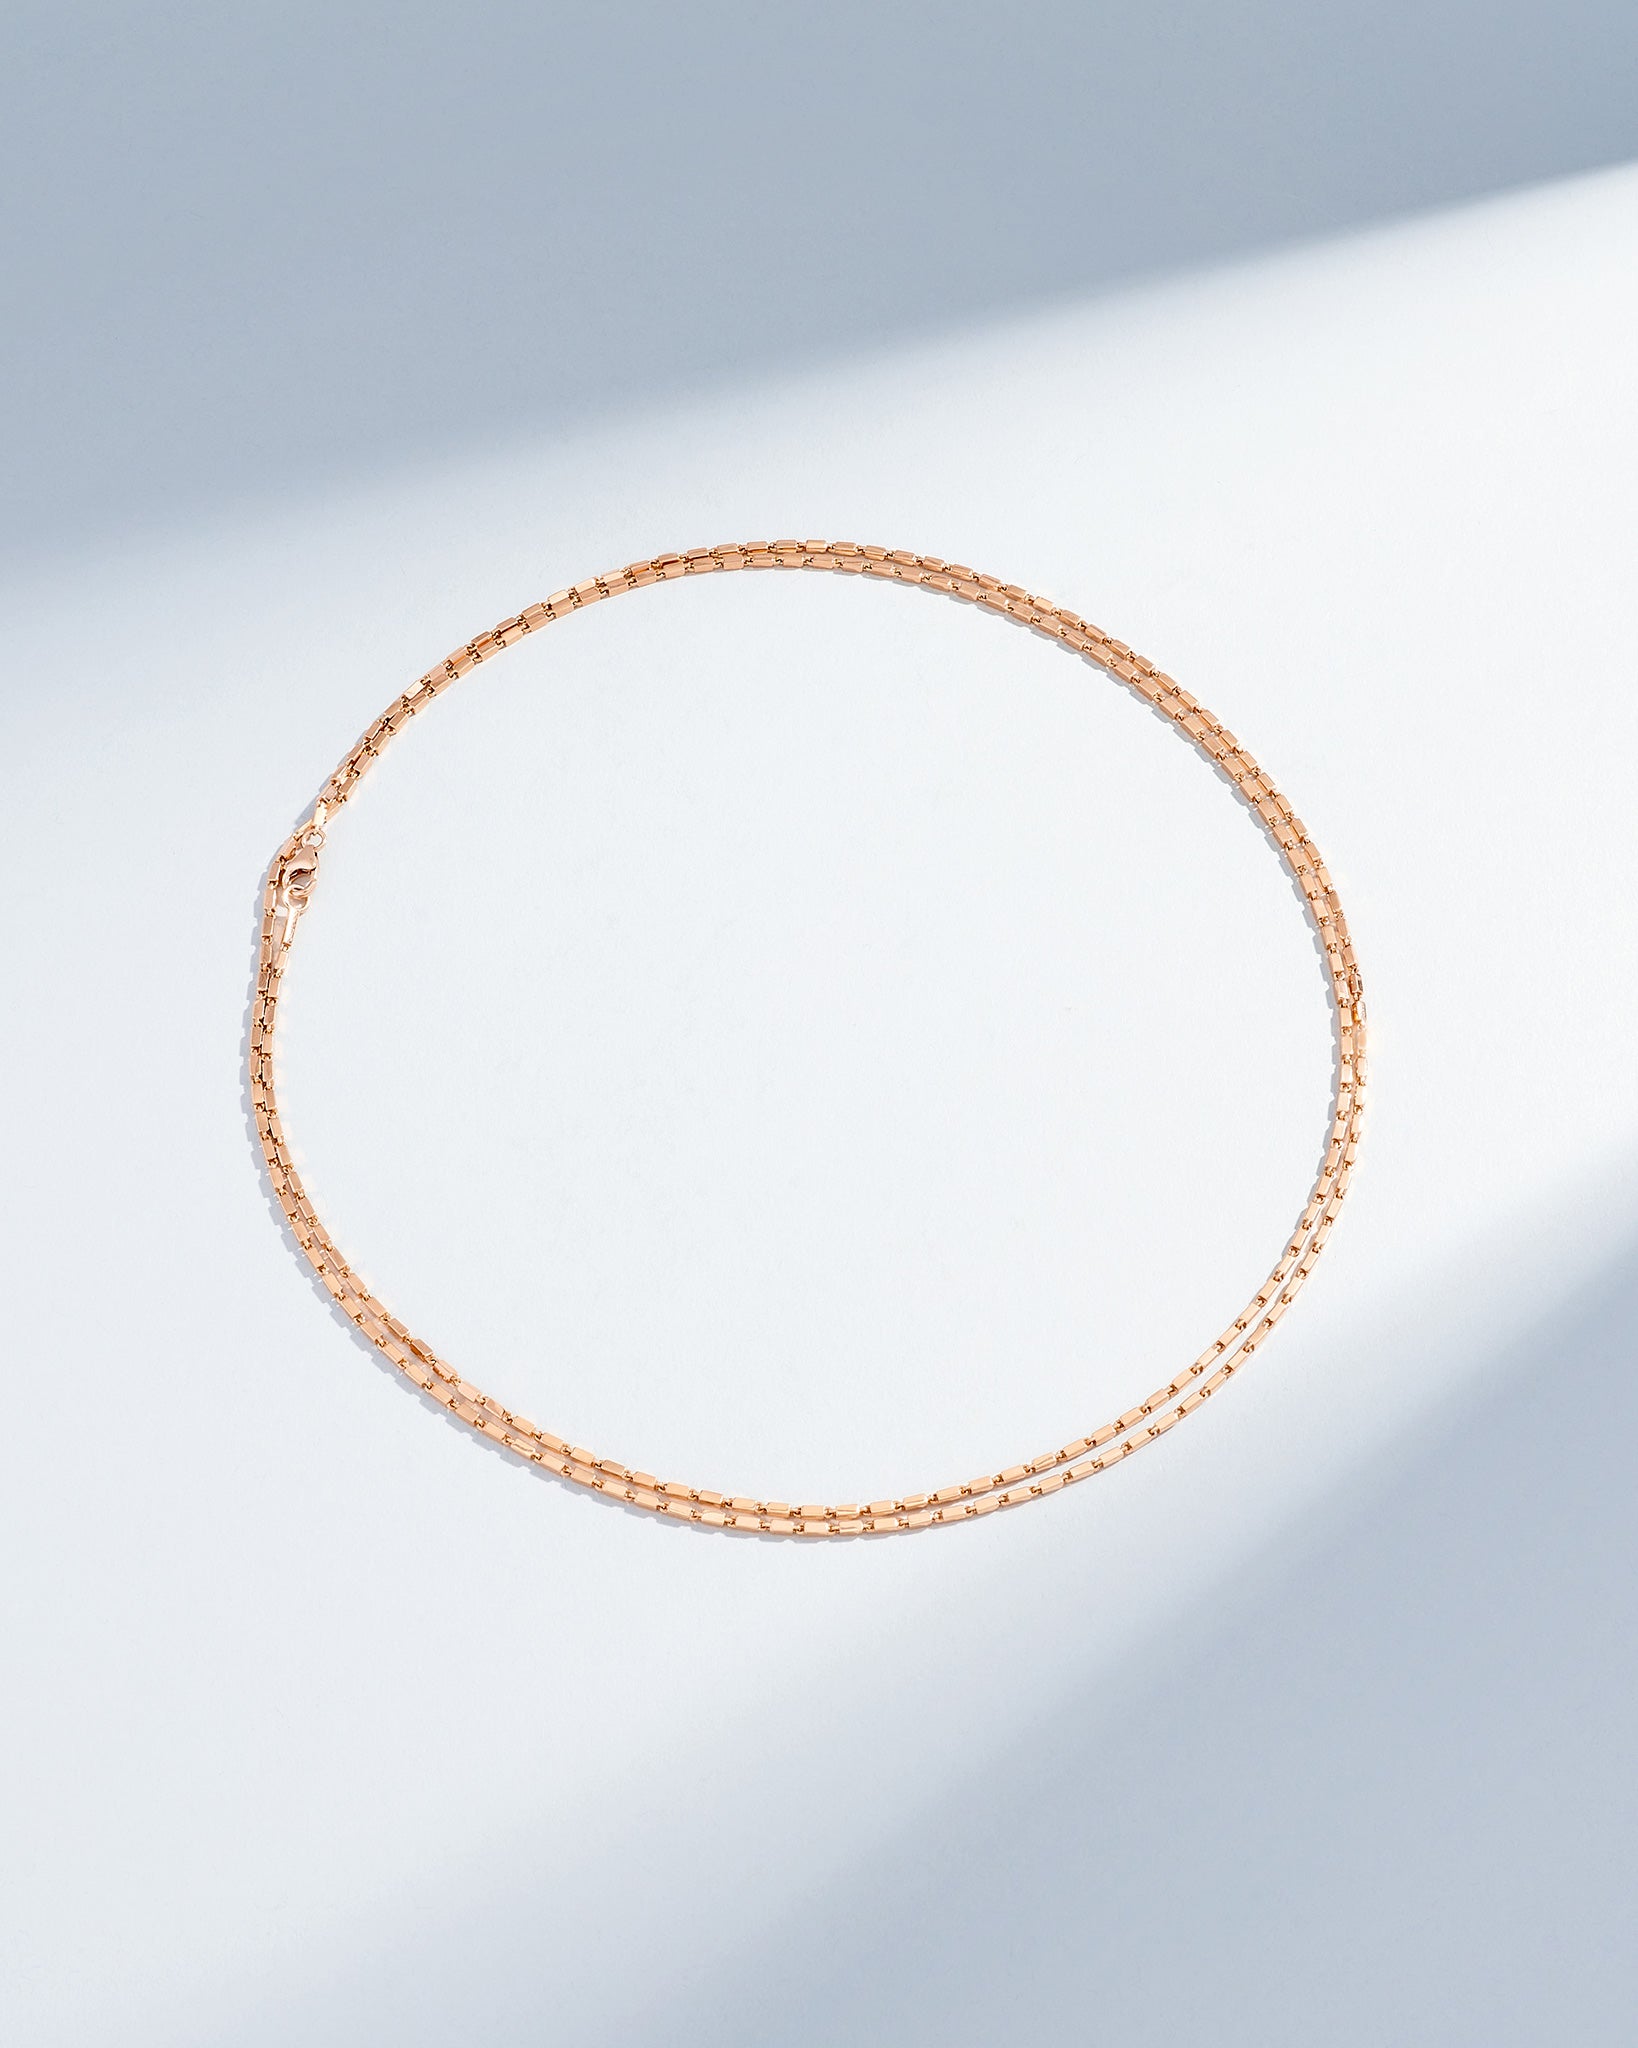 Suzanne Kalan Block-Chain Thin 36" Necklace in 18k rose gold